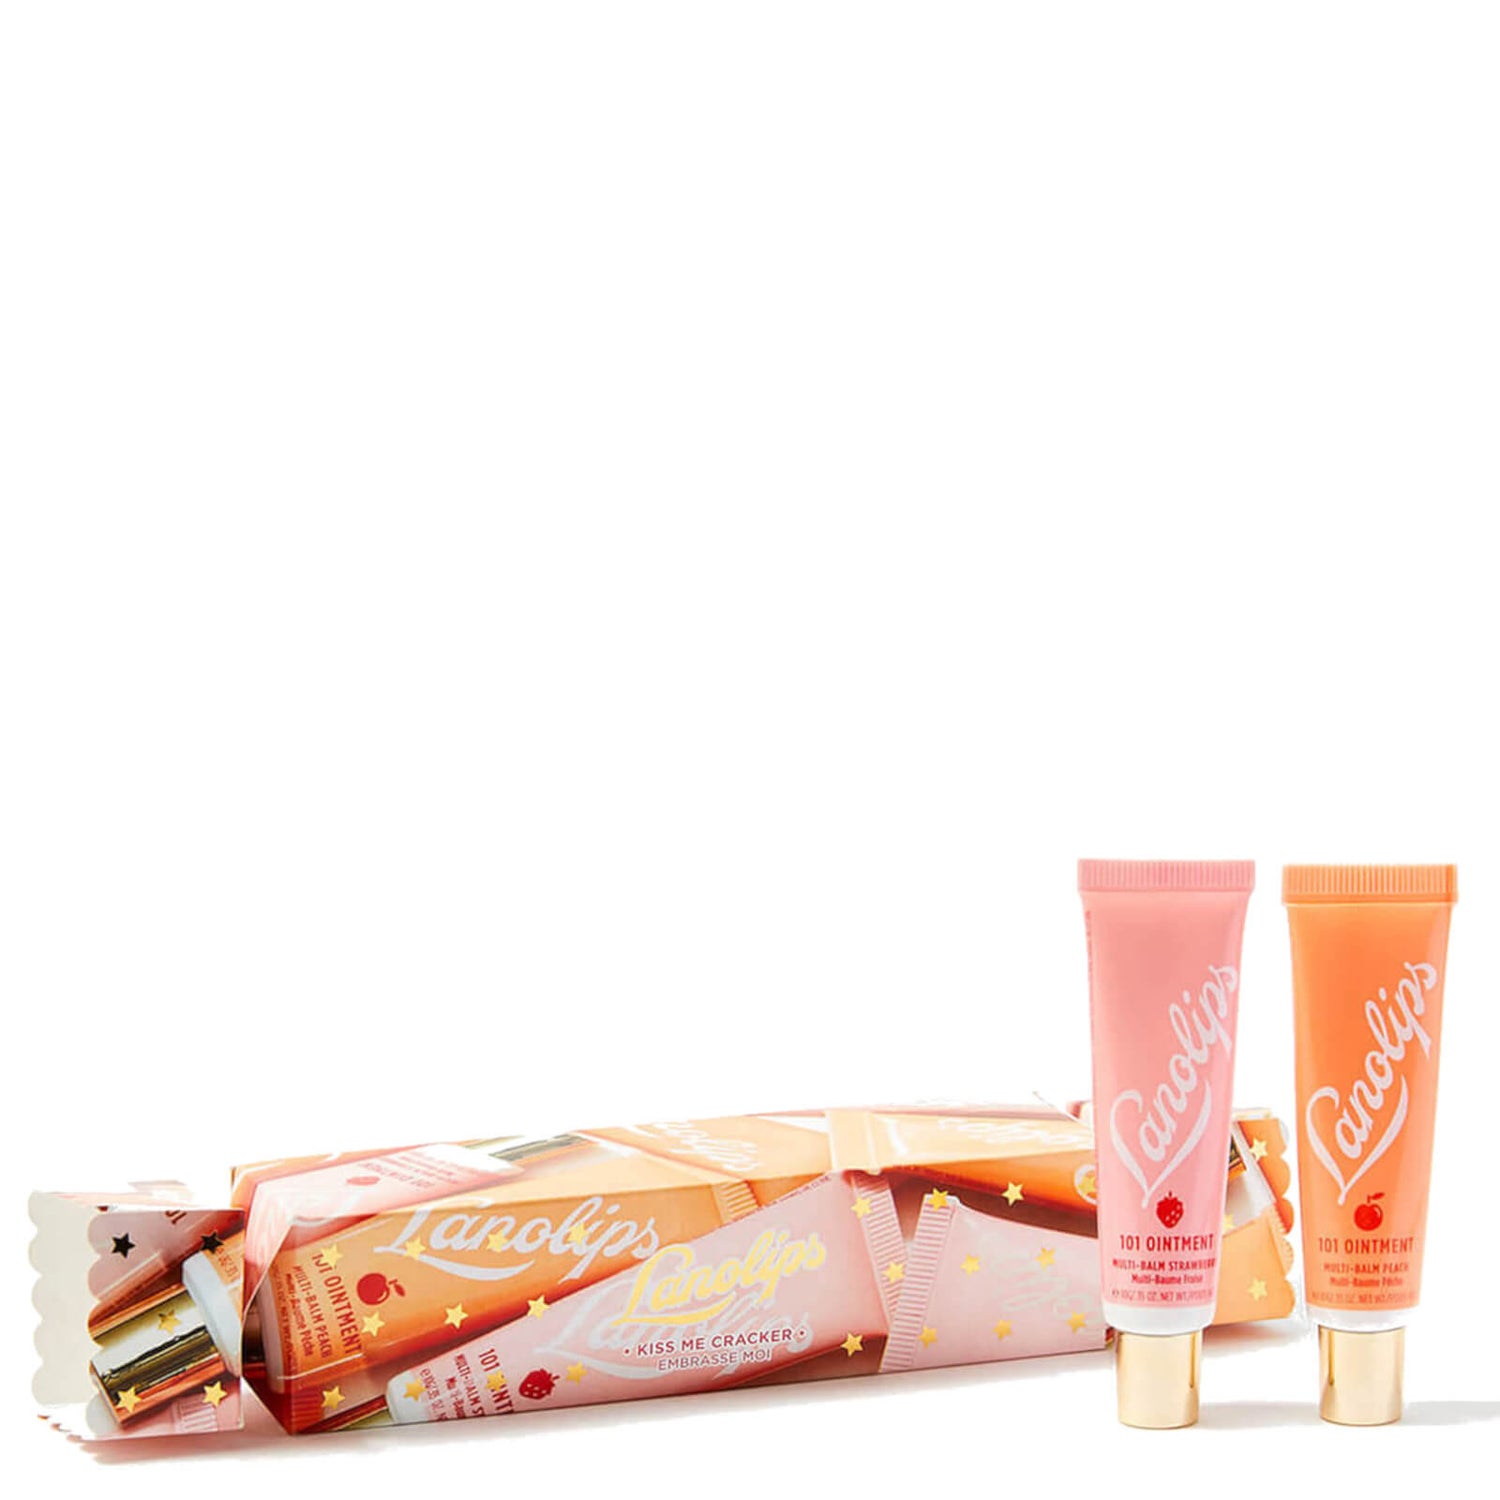 Lanolips Kiss Me Cracker Limited Edition (Worth £15.98)